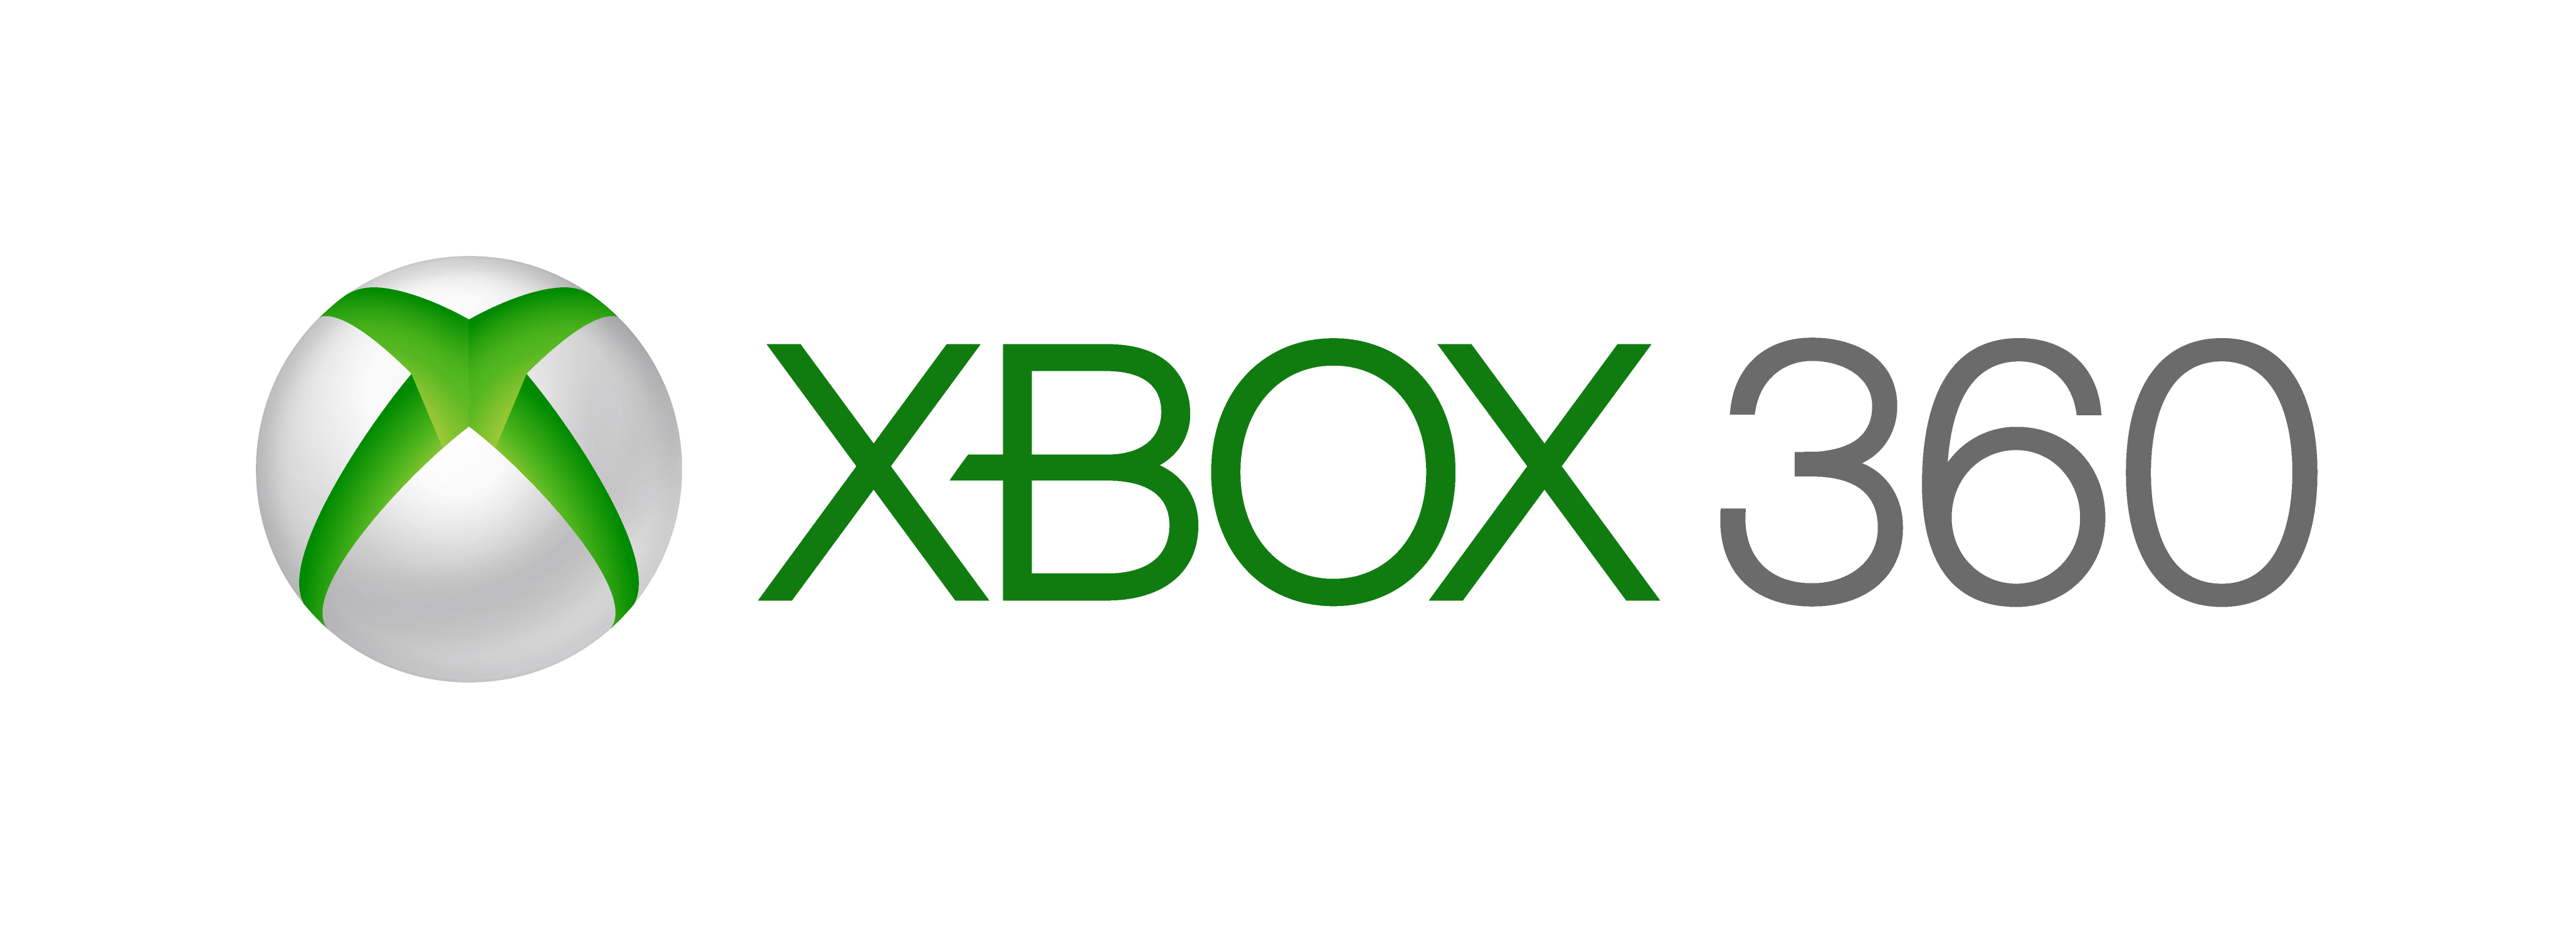 Xbox 360 Logo - Xbox 360 Logo Png (92+ images in Collection) Page 1